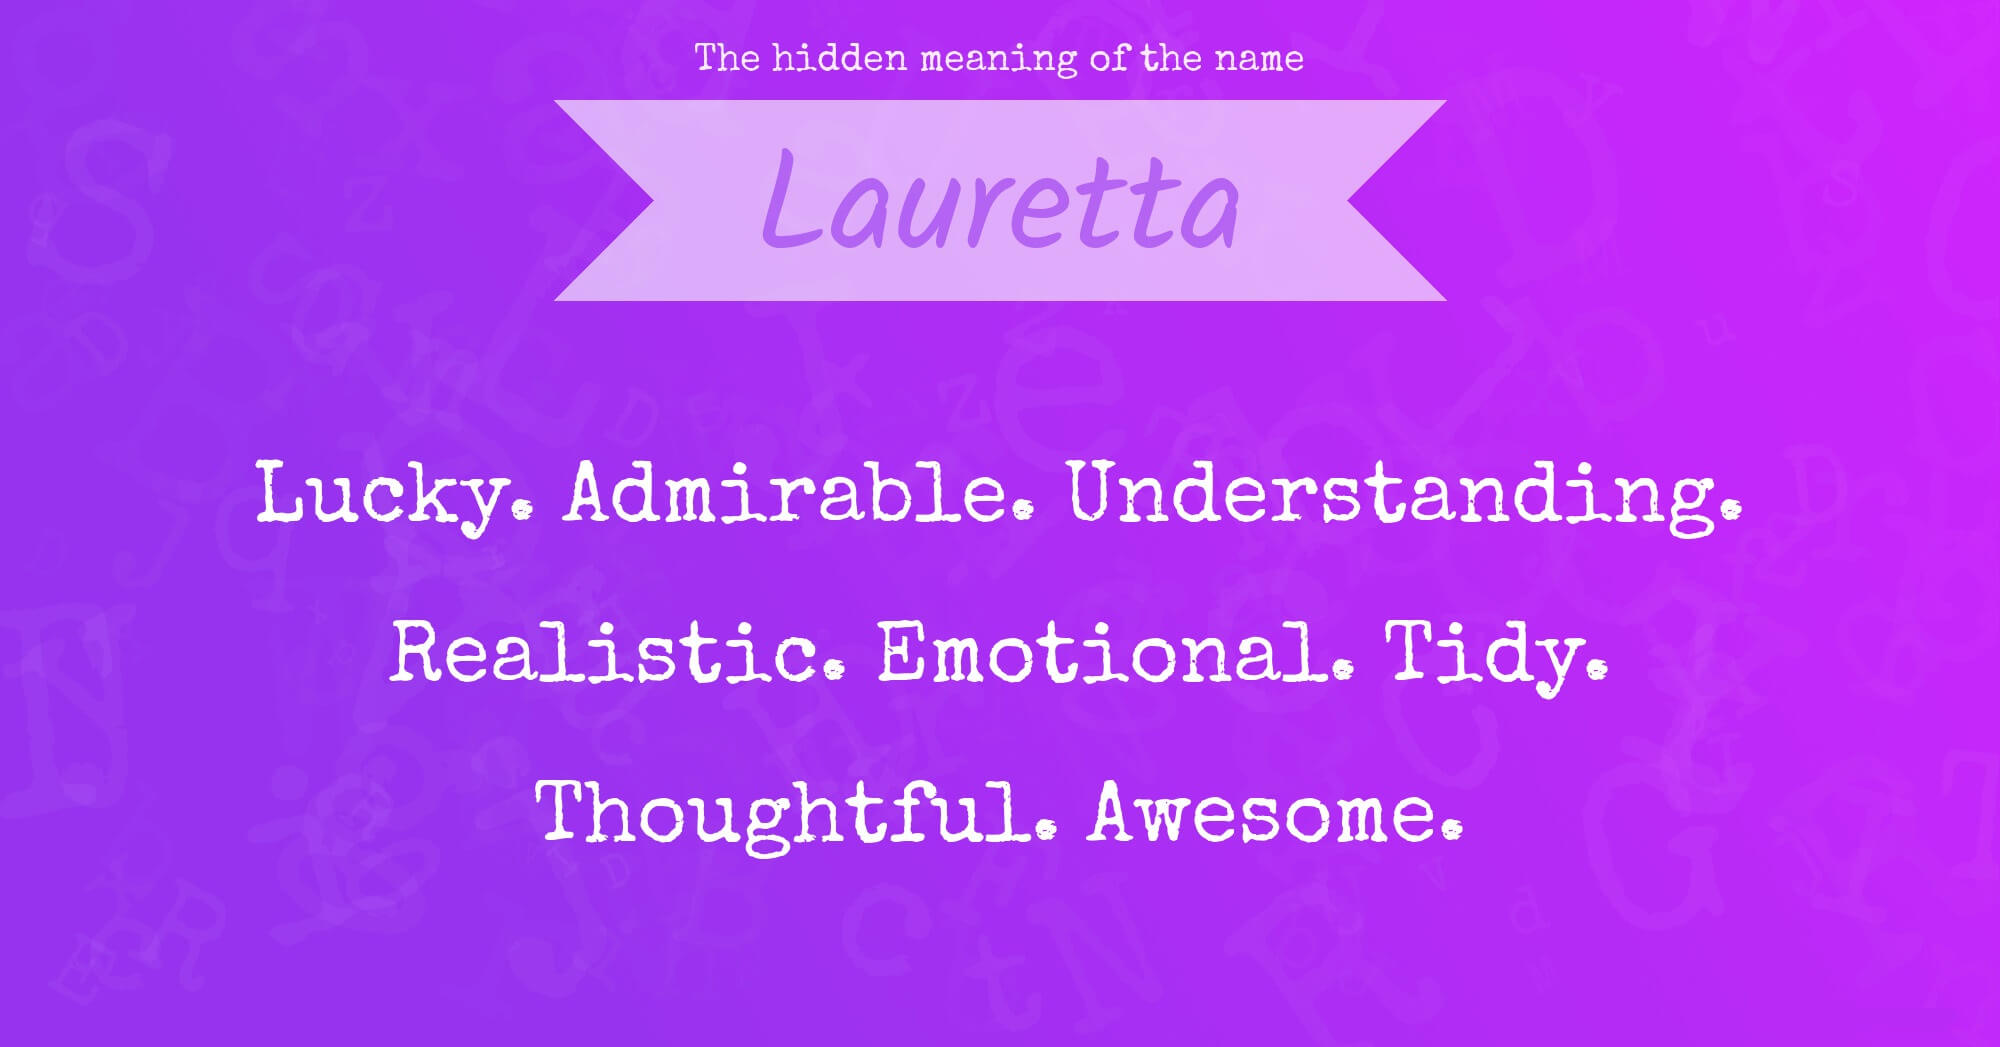 The Hidden Meaning of The Name Lauretta